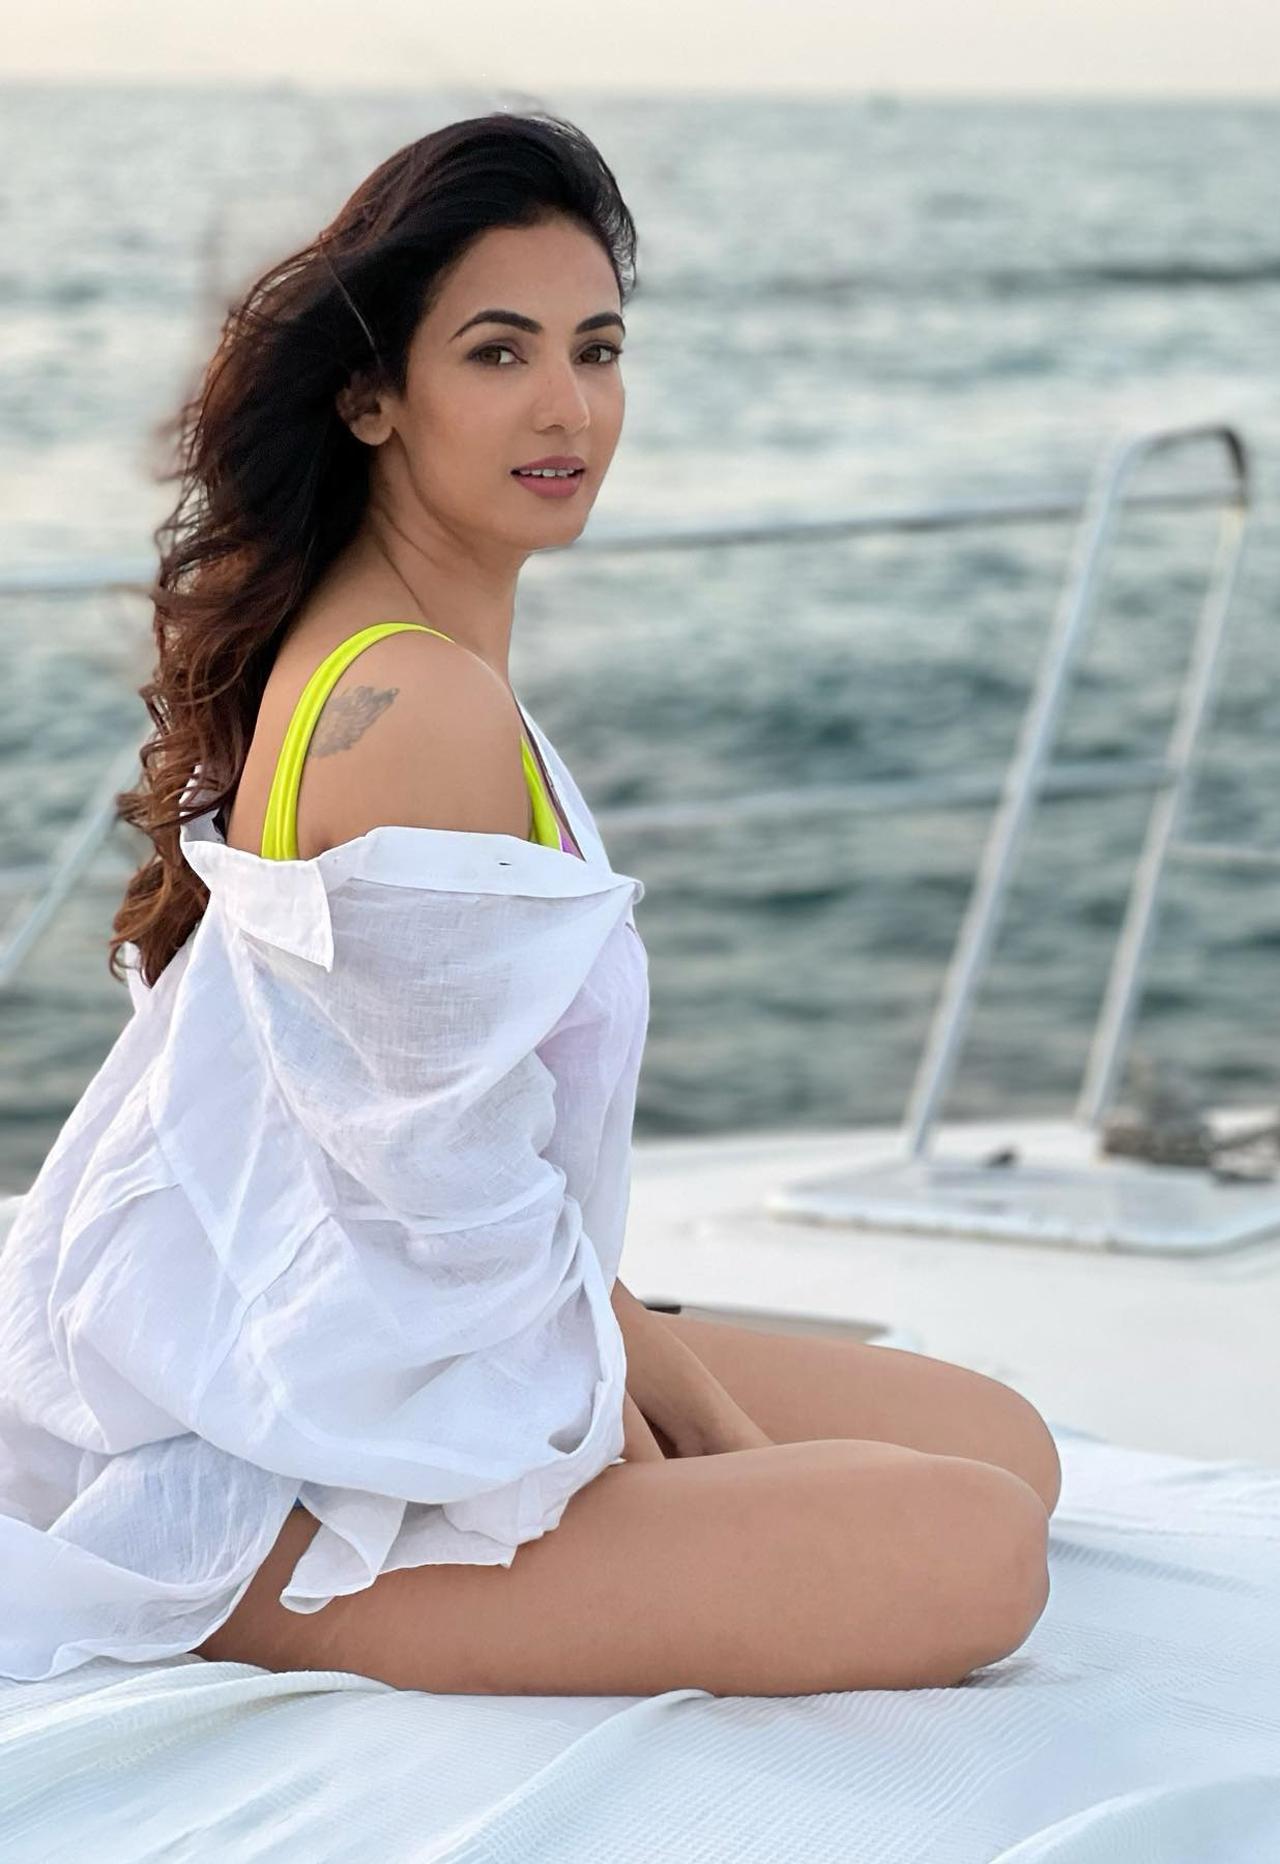 Anjali Kannada Sex - Sonal Chauhan: Here's what the 35-year-old Jannat actress is up to